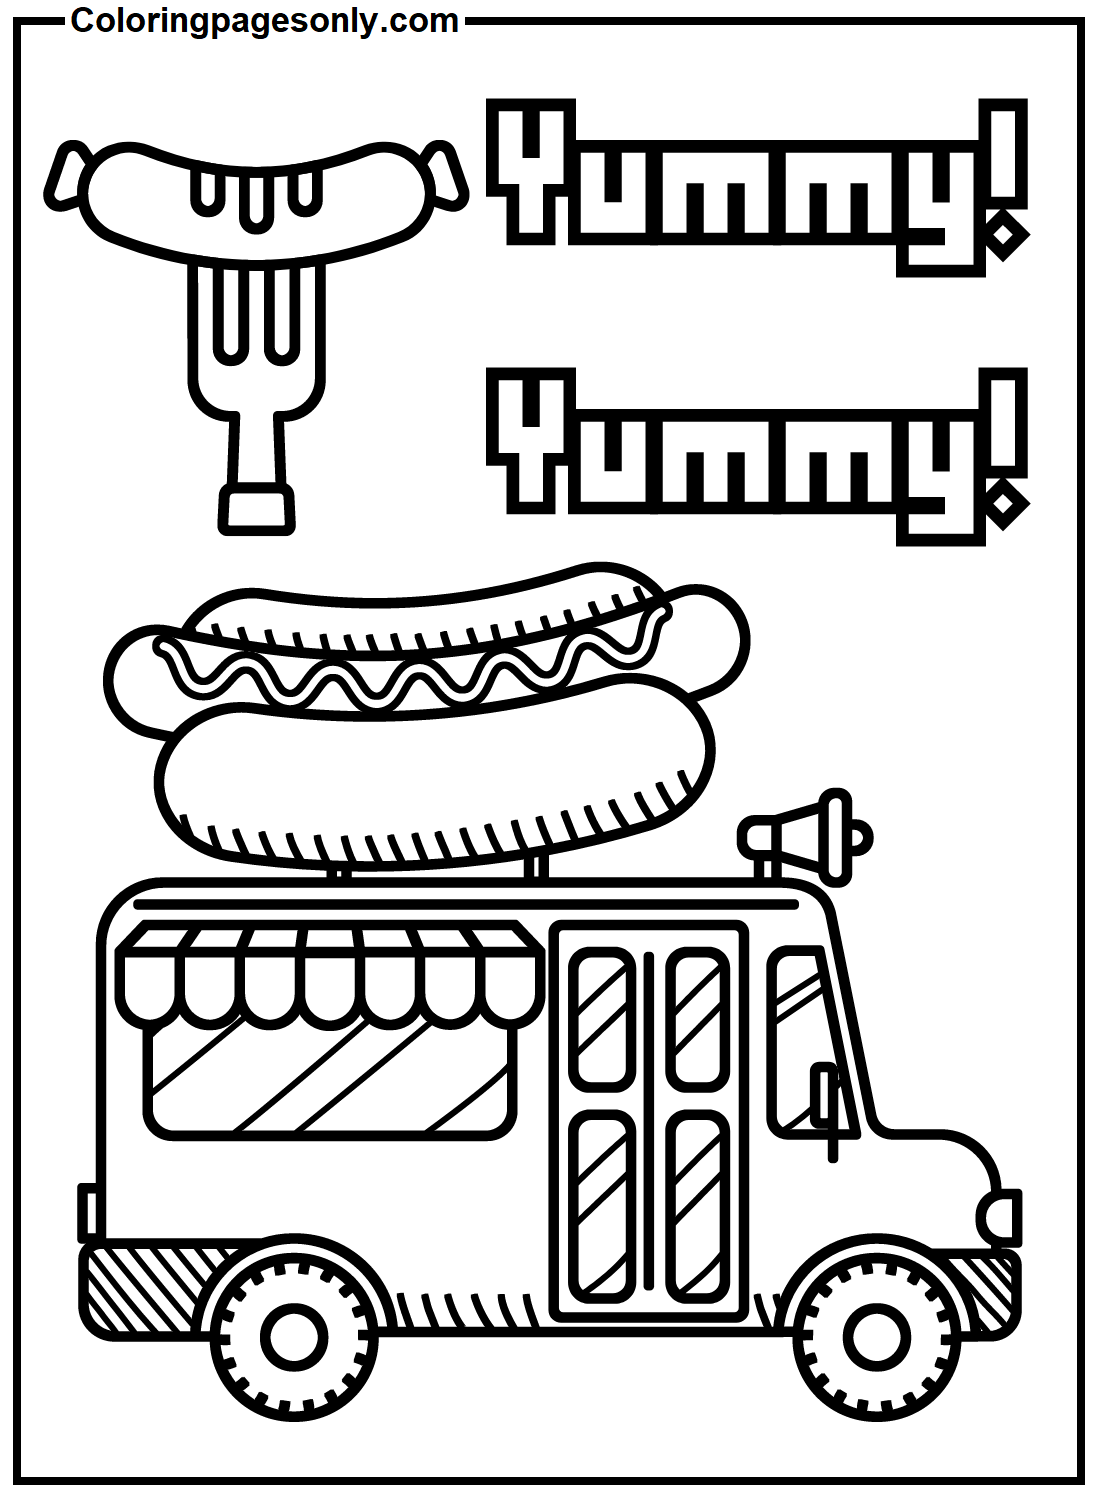 Hot Dog Van Coloring Pages